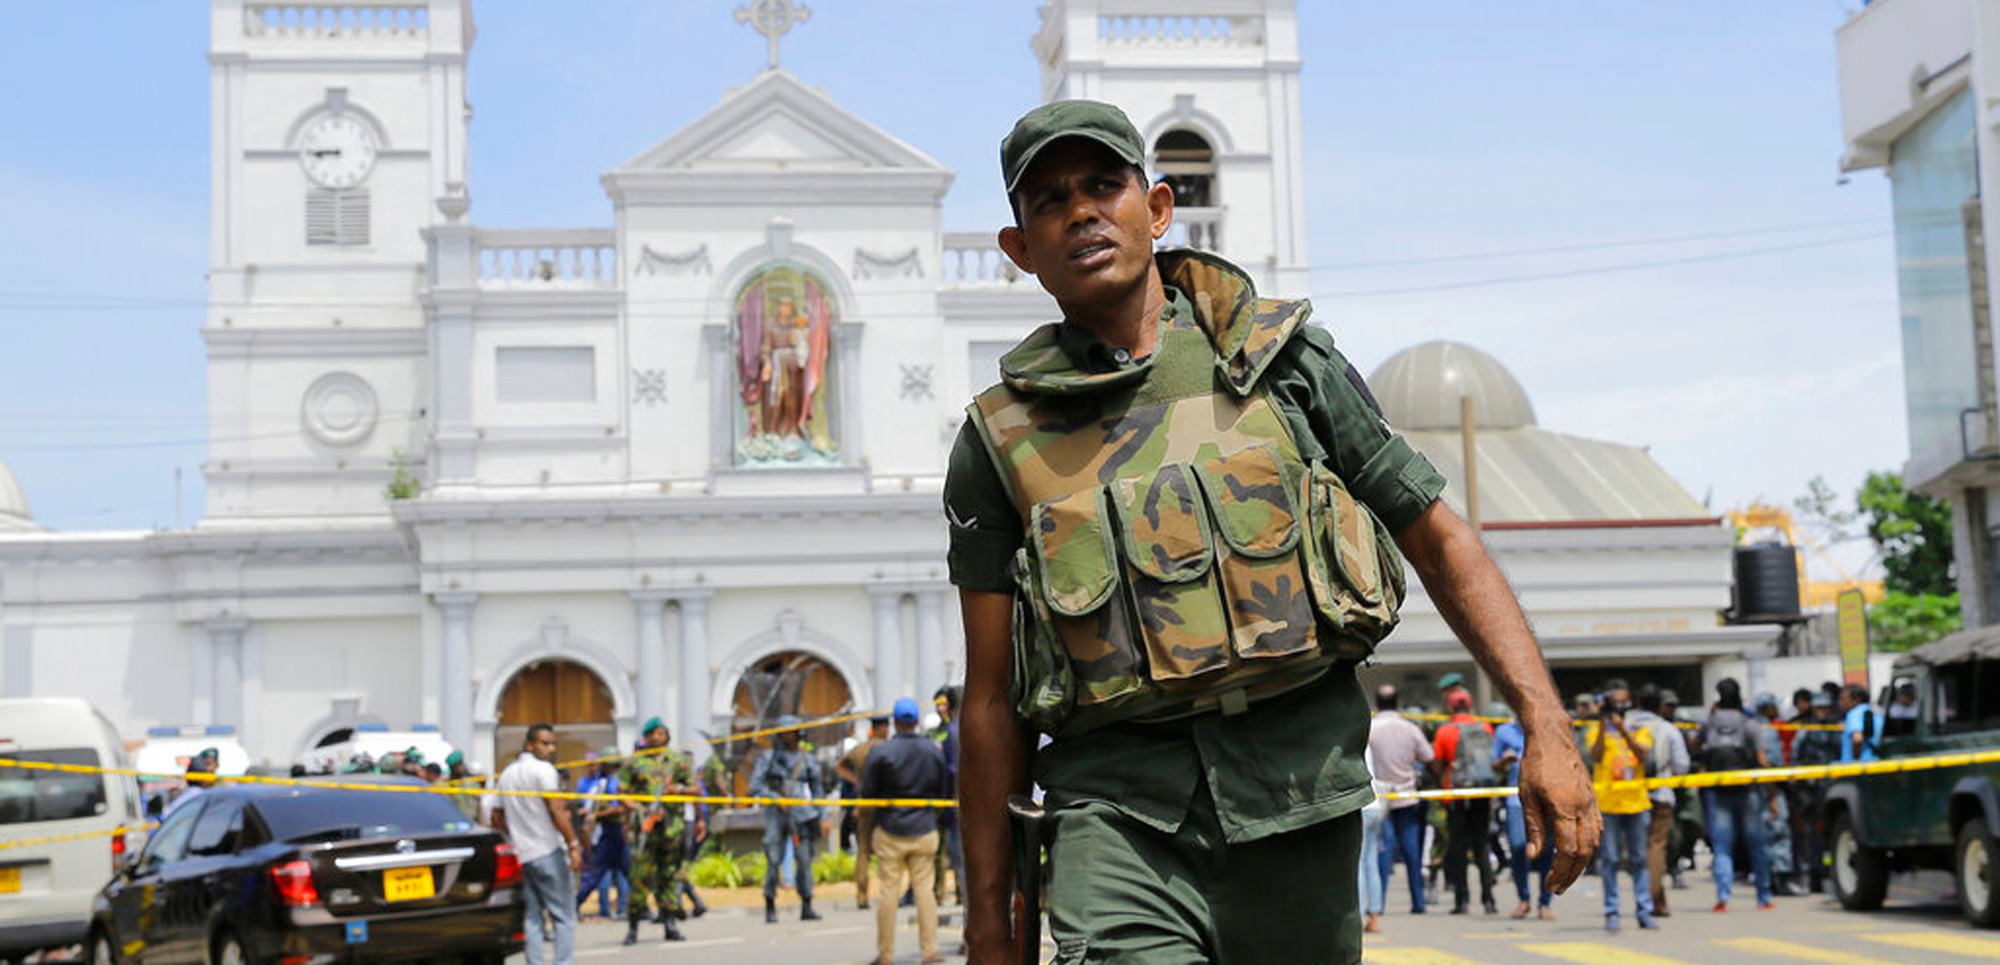 Sri Lankan Army soldiers secure the area around St. Anthony's Shrine after a blast in Colombo, Sri Lanka, Sunday, April 21, 2019